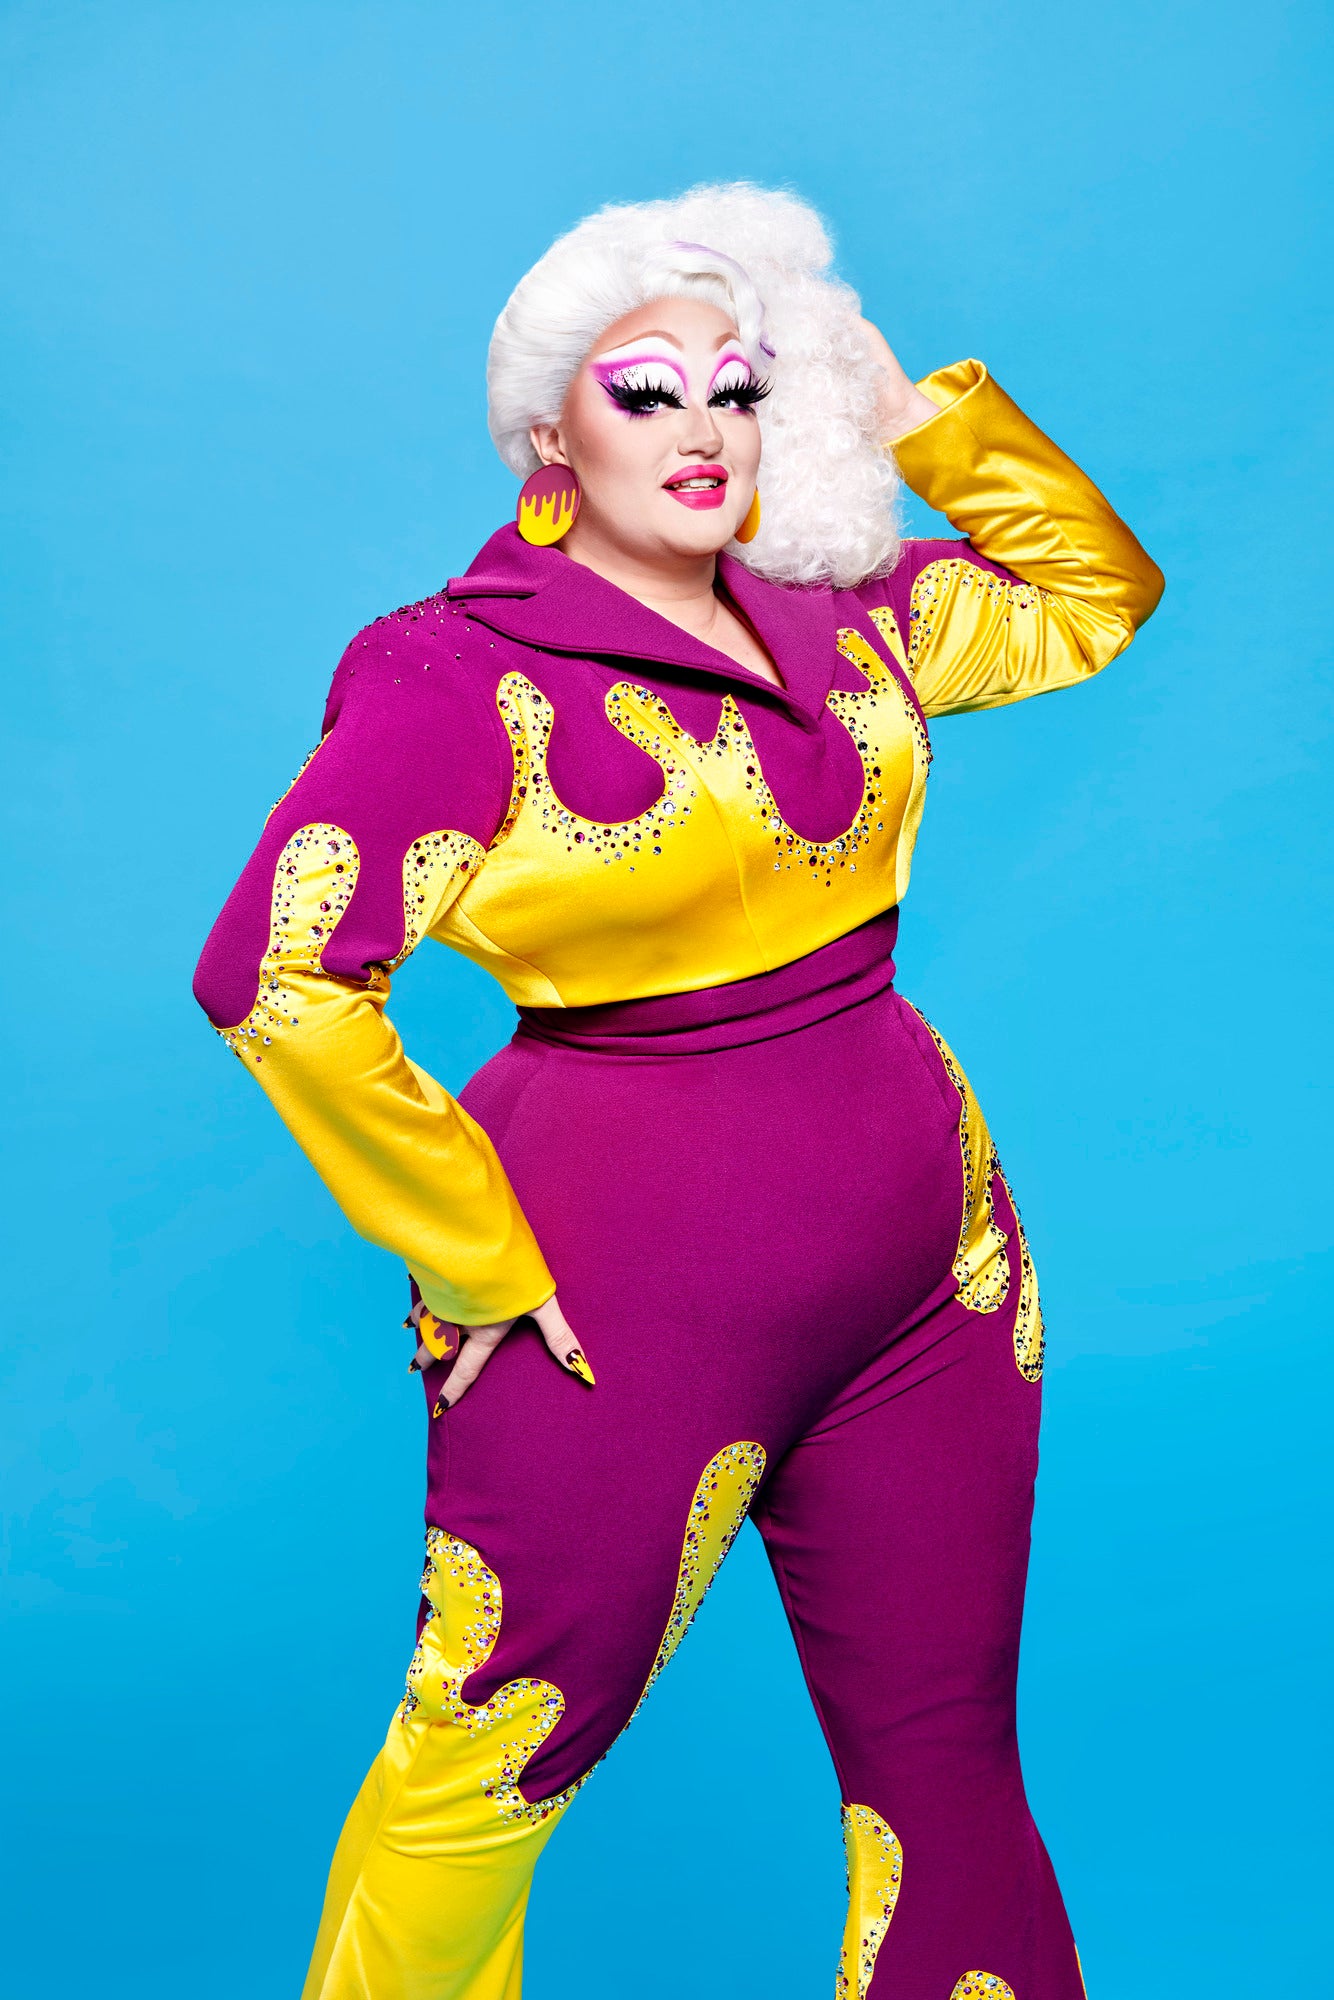 Victoria Scone is the first cisgender woman to compete in the ‘Drag Race’ franchise